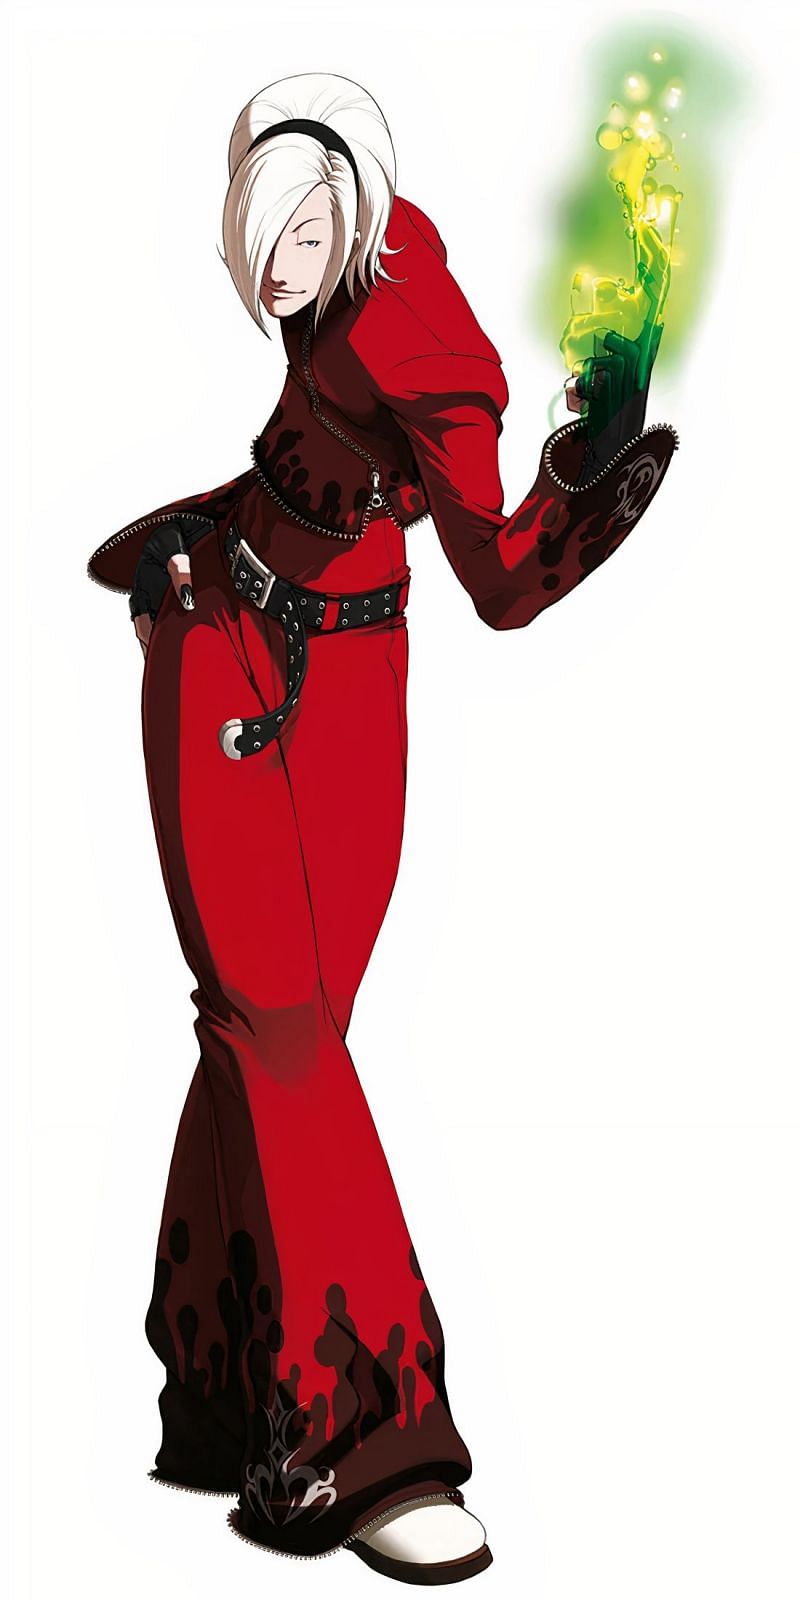 Ash Crimson from The King of Fighters 2003 (Image via SNK)